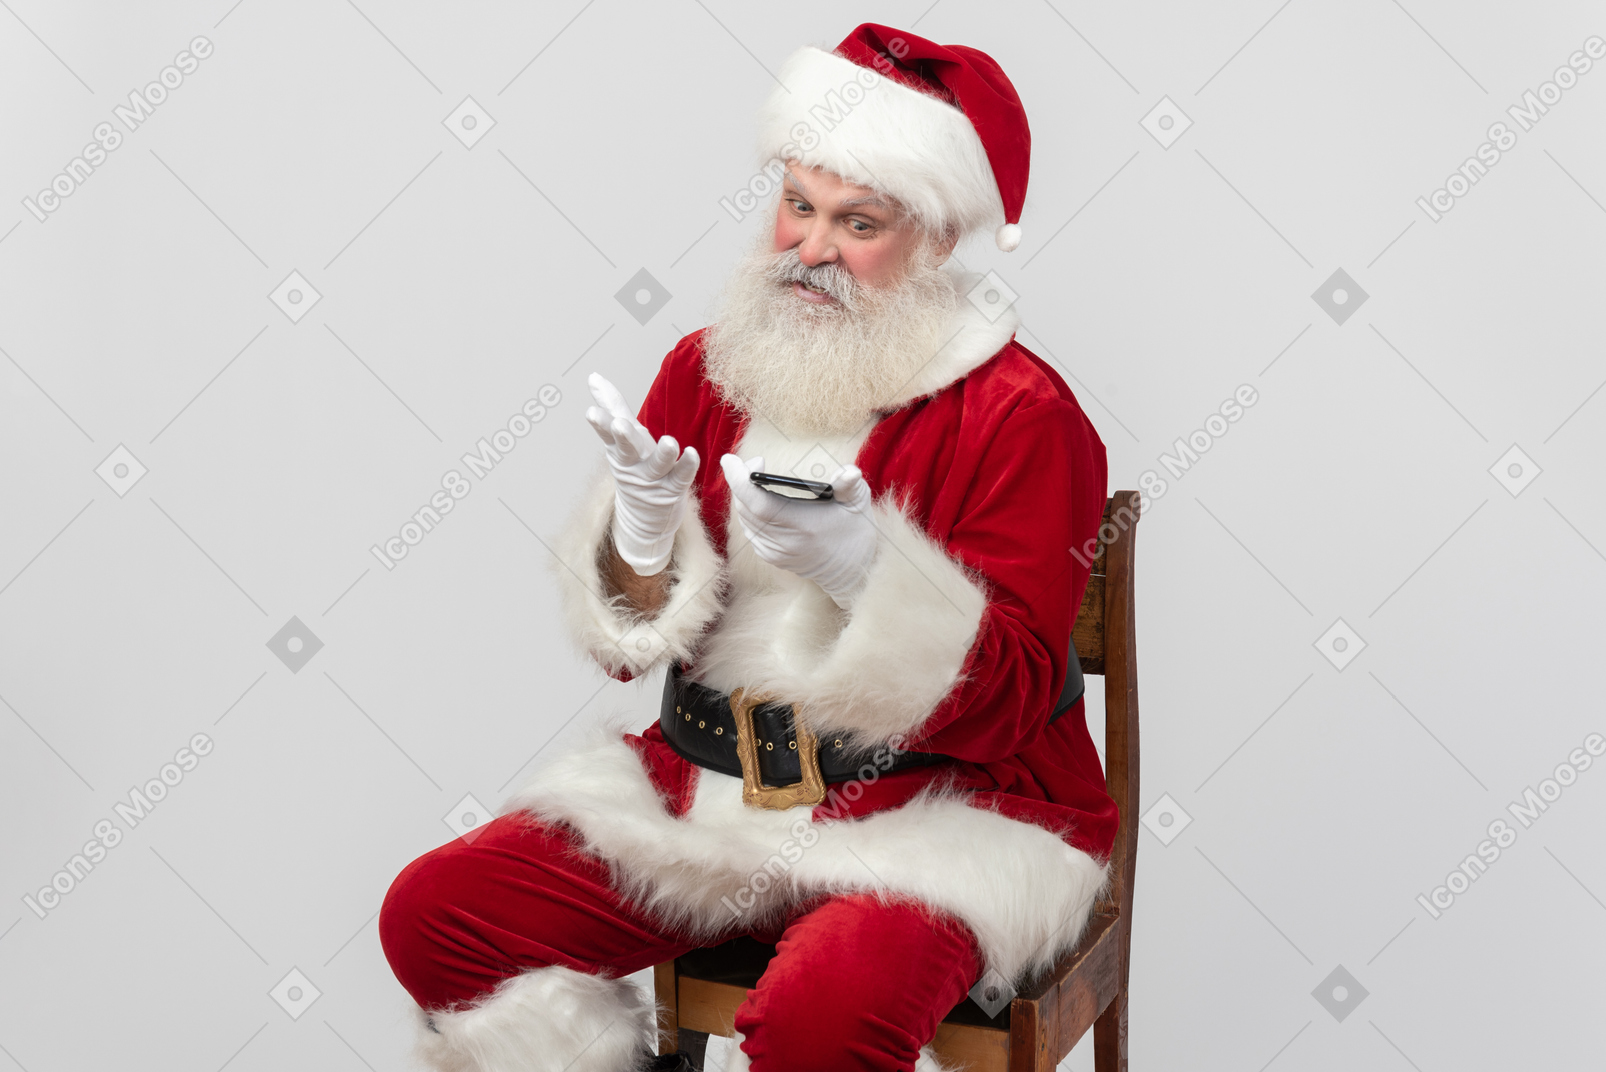 Santa clus holding smartphone and looking on it